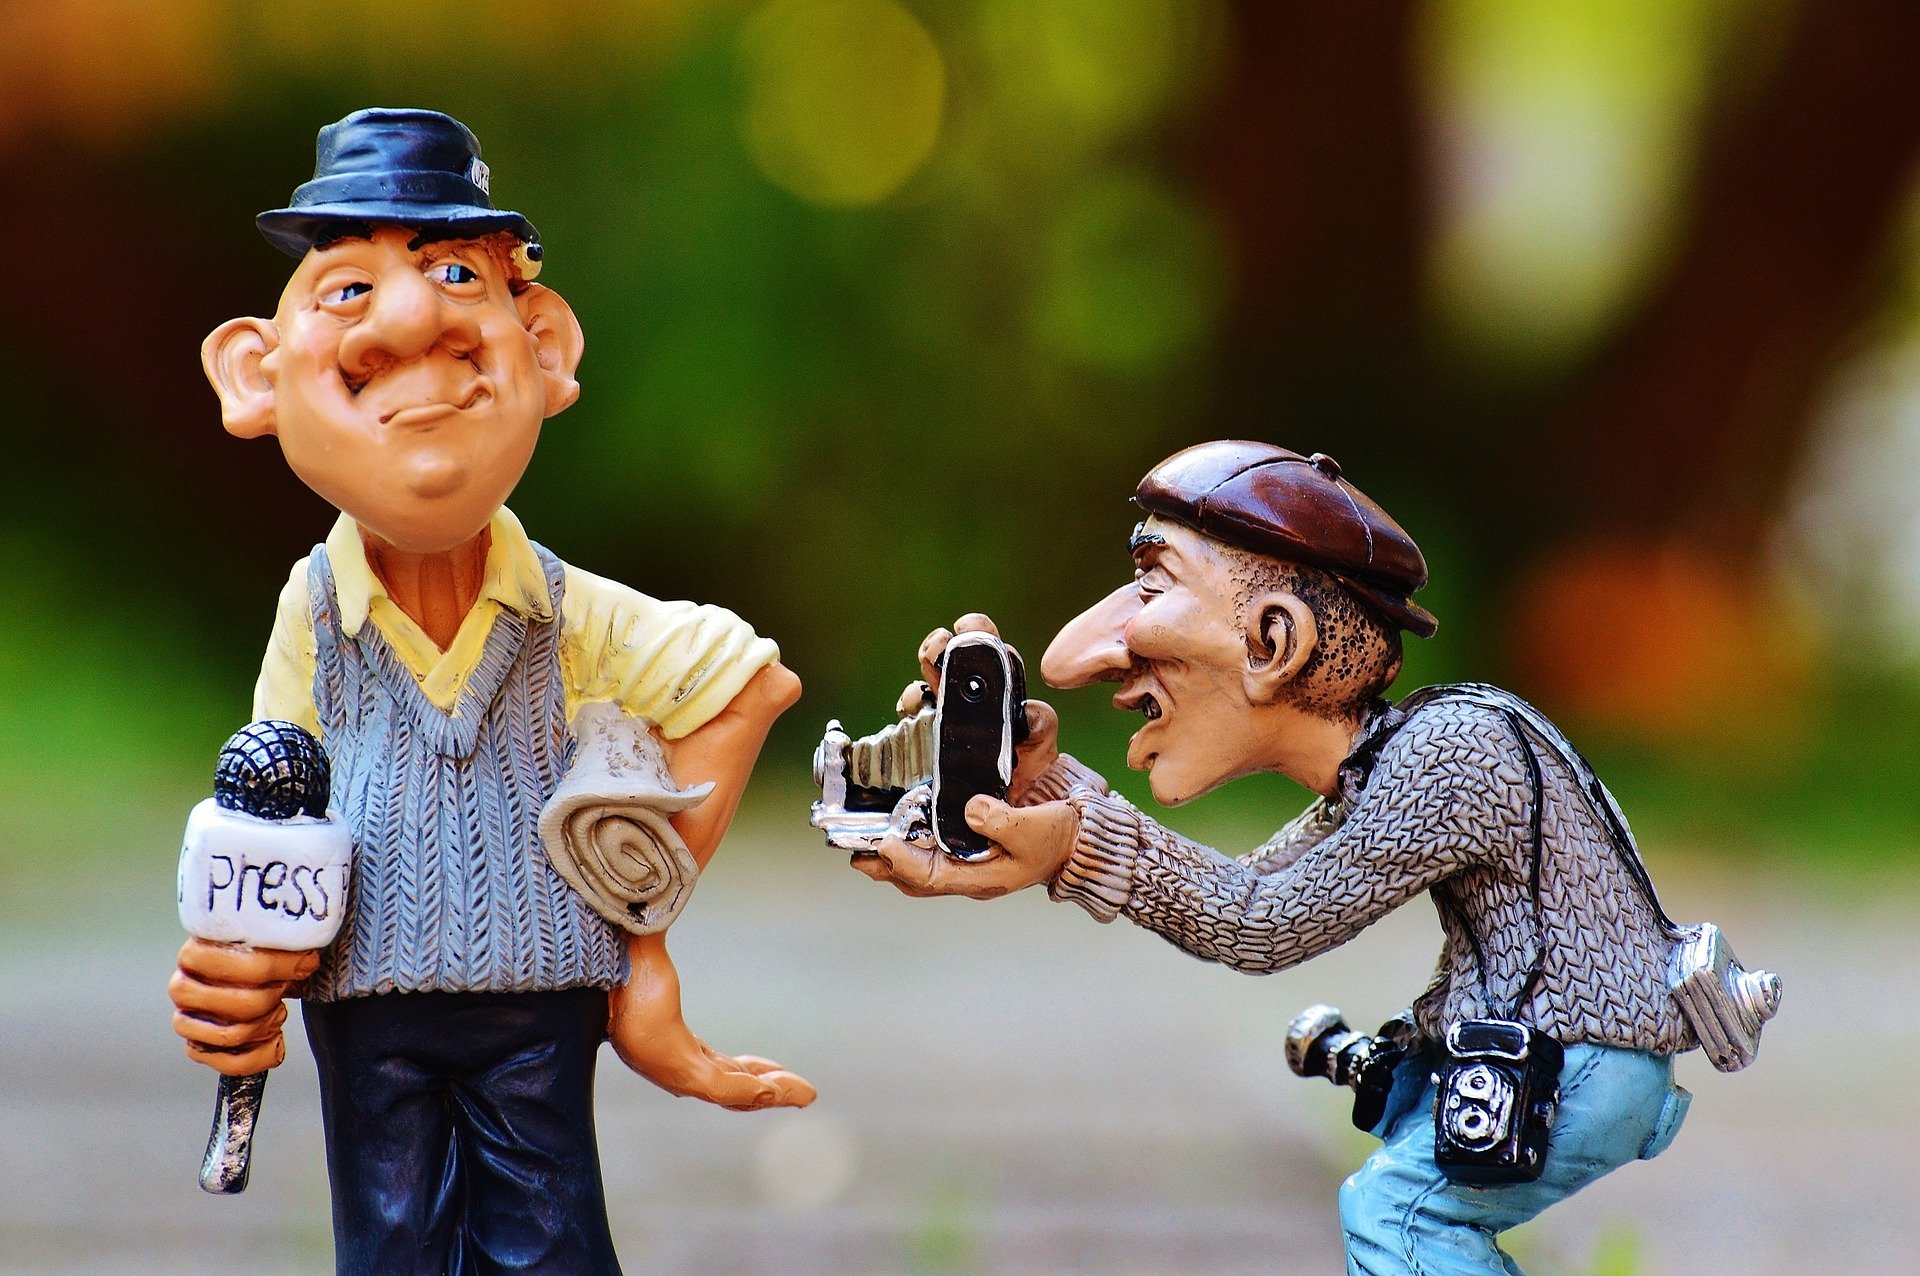 Press And Journalist Figurines HD Wallpaper | Background Image | 1920x1276